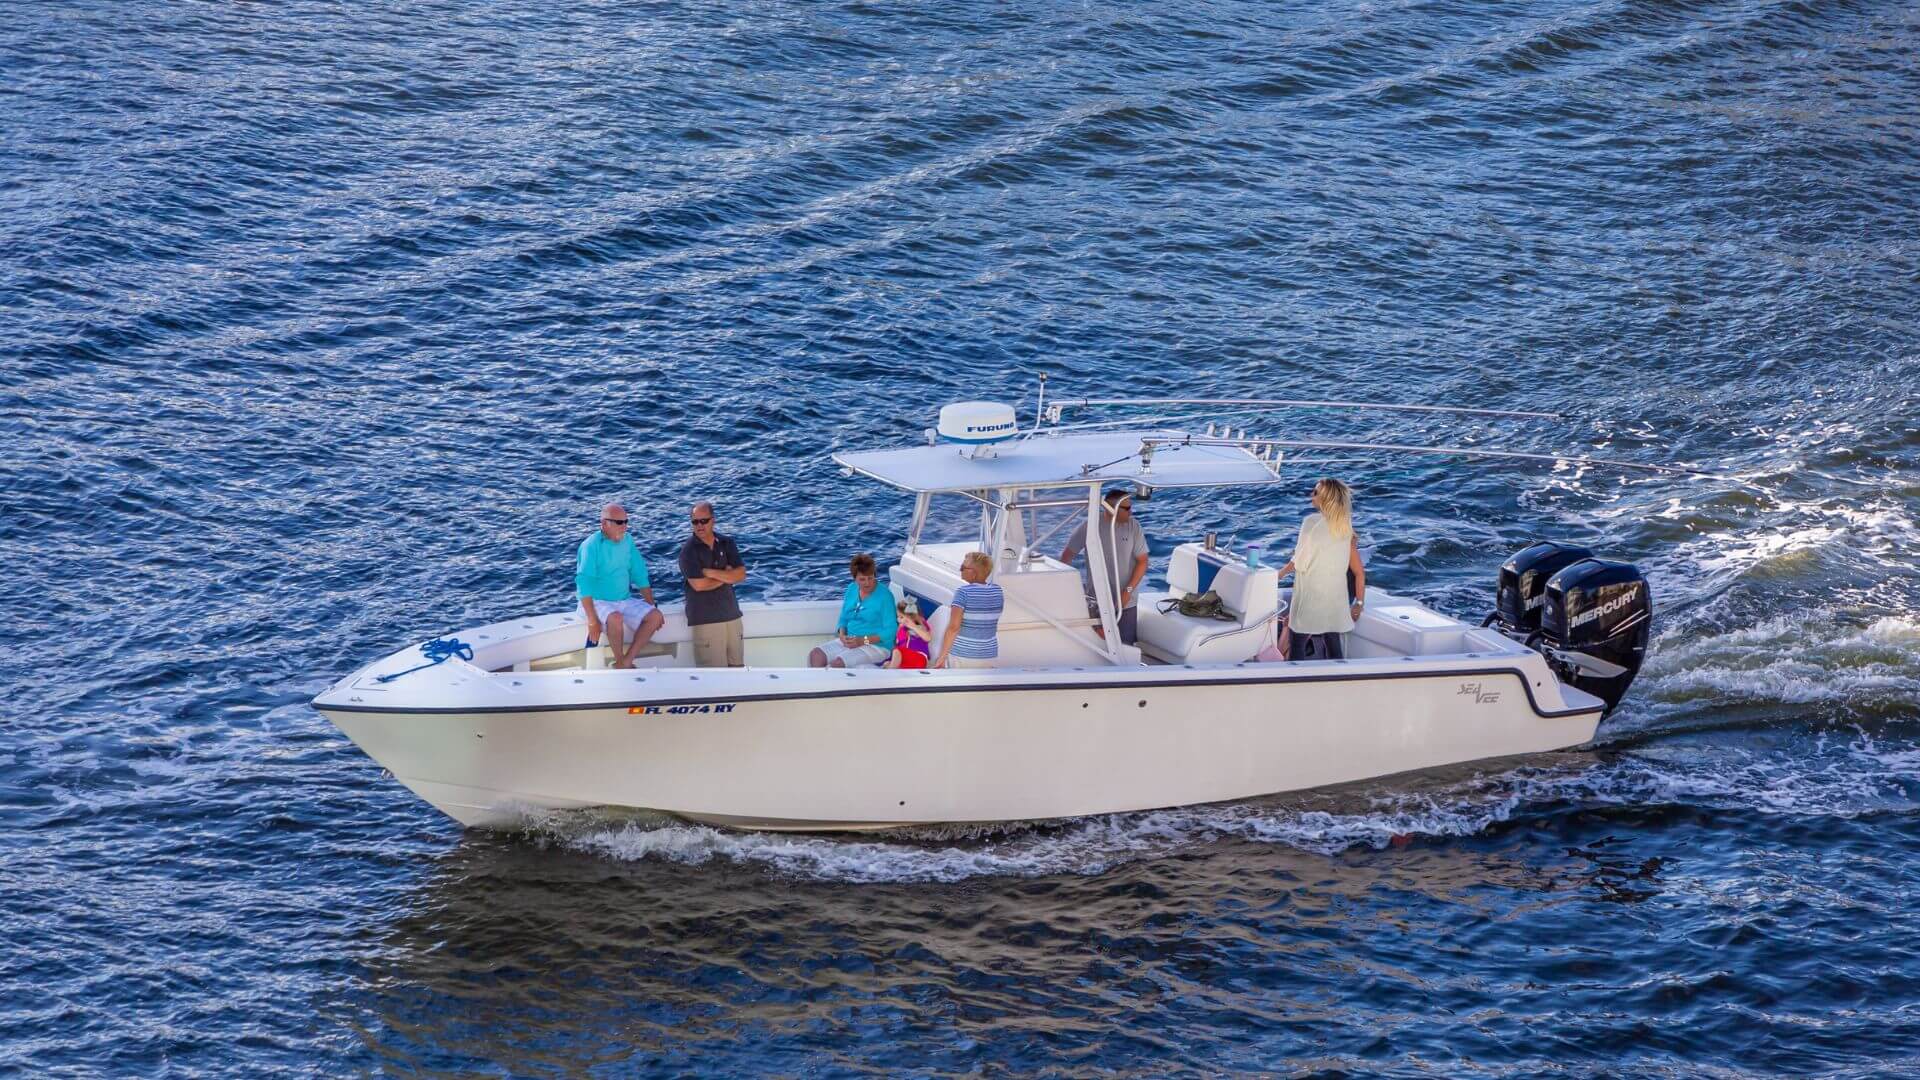 What Are Your Options if You're Looking to Finance a Boat Purchase